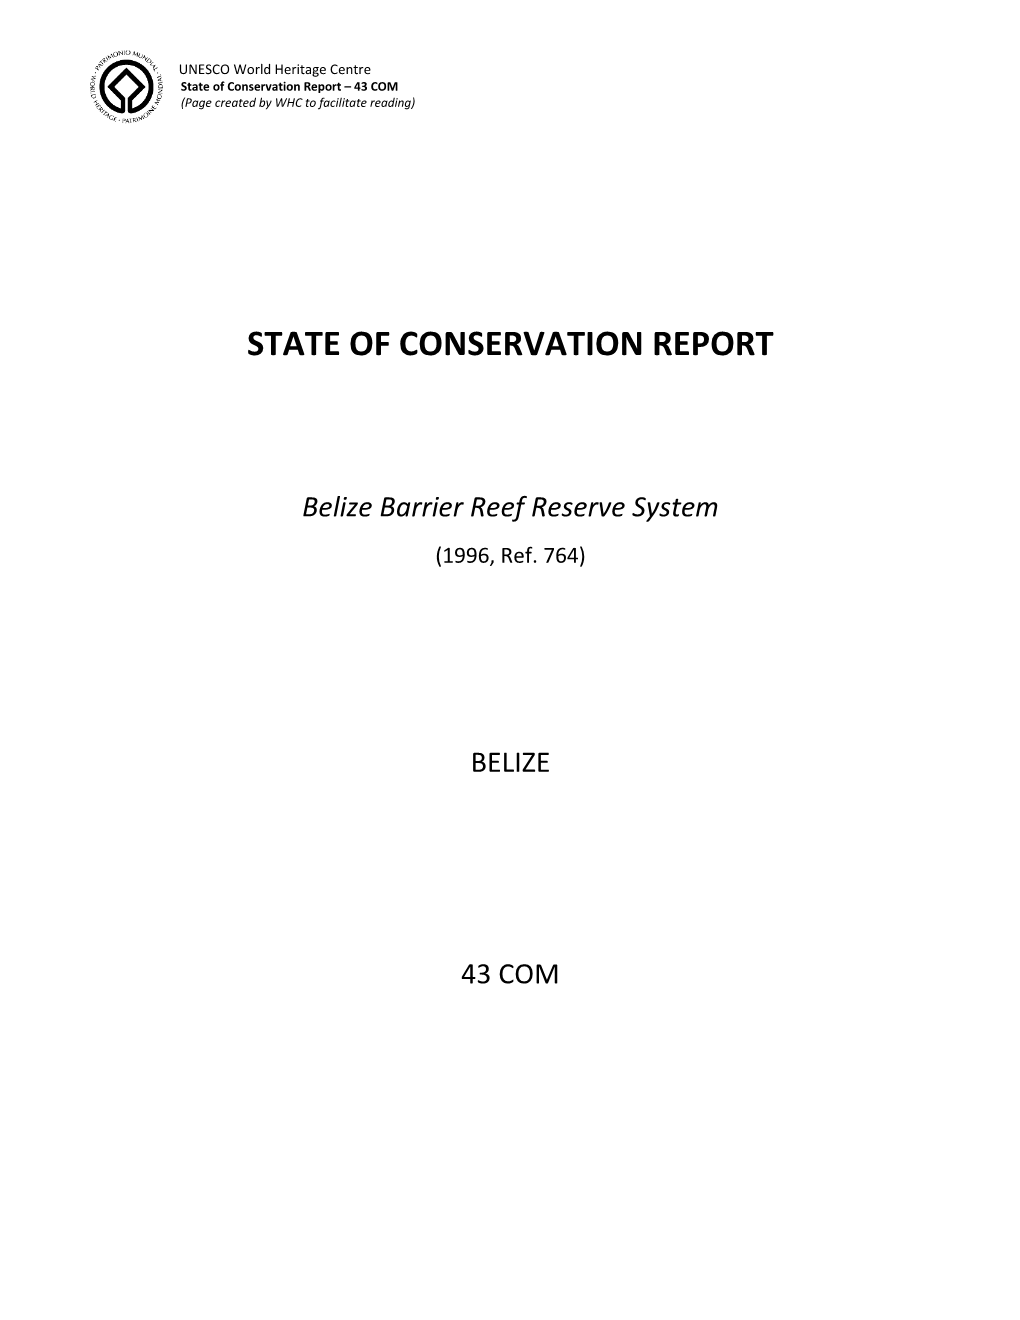 State of Conservation Report – 43 COM (Page Created by WHC to Facilitate Reading)